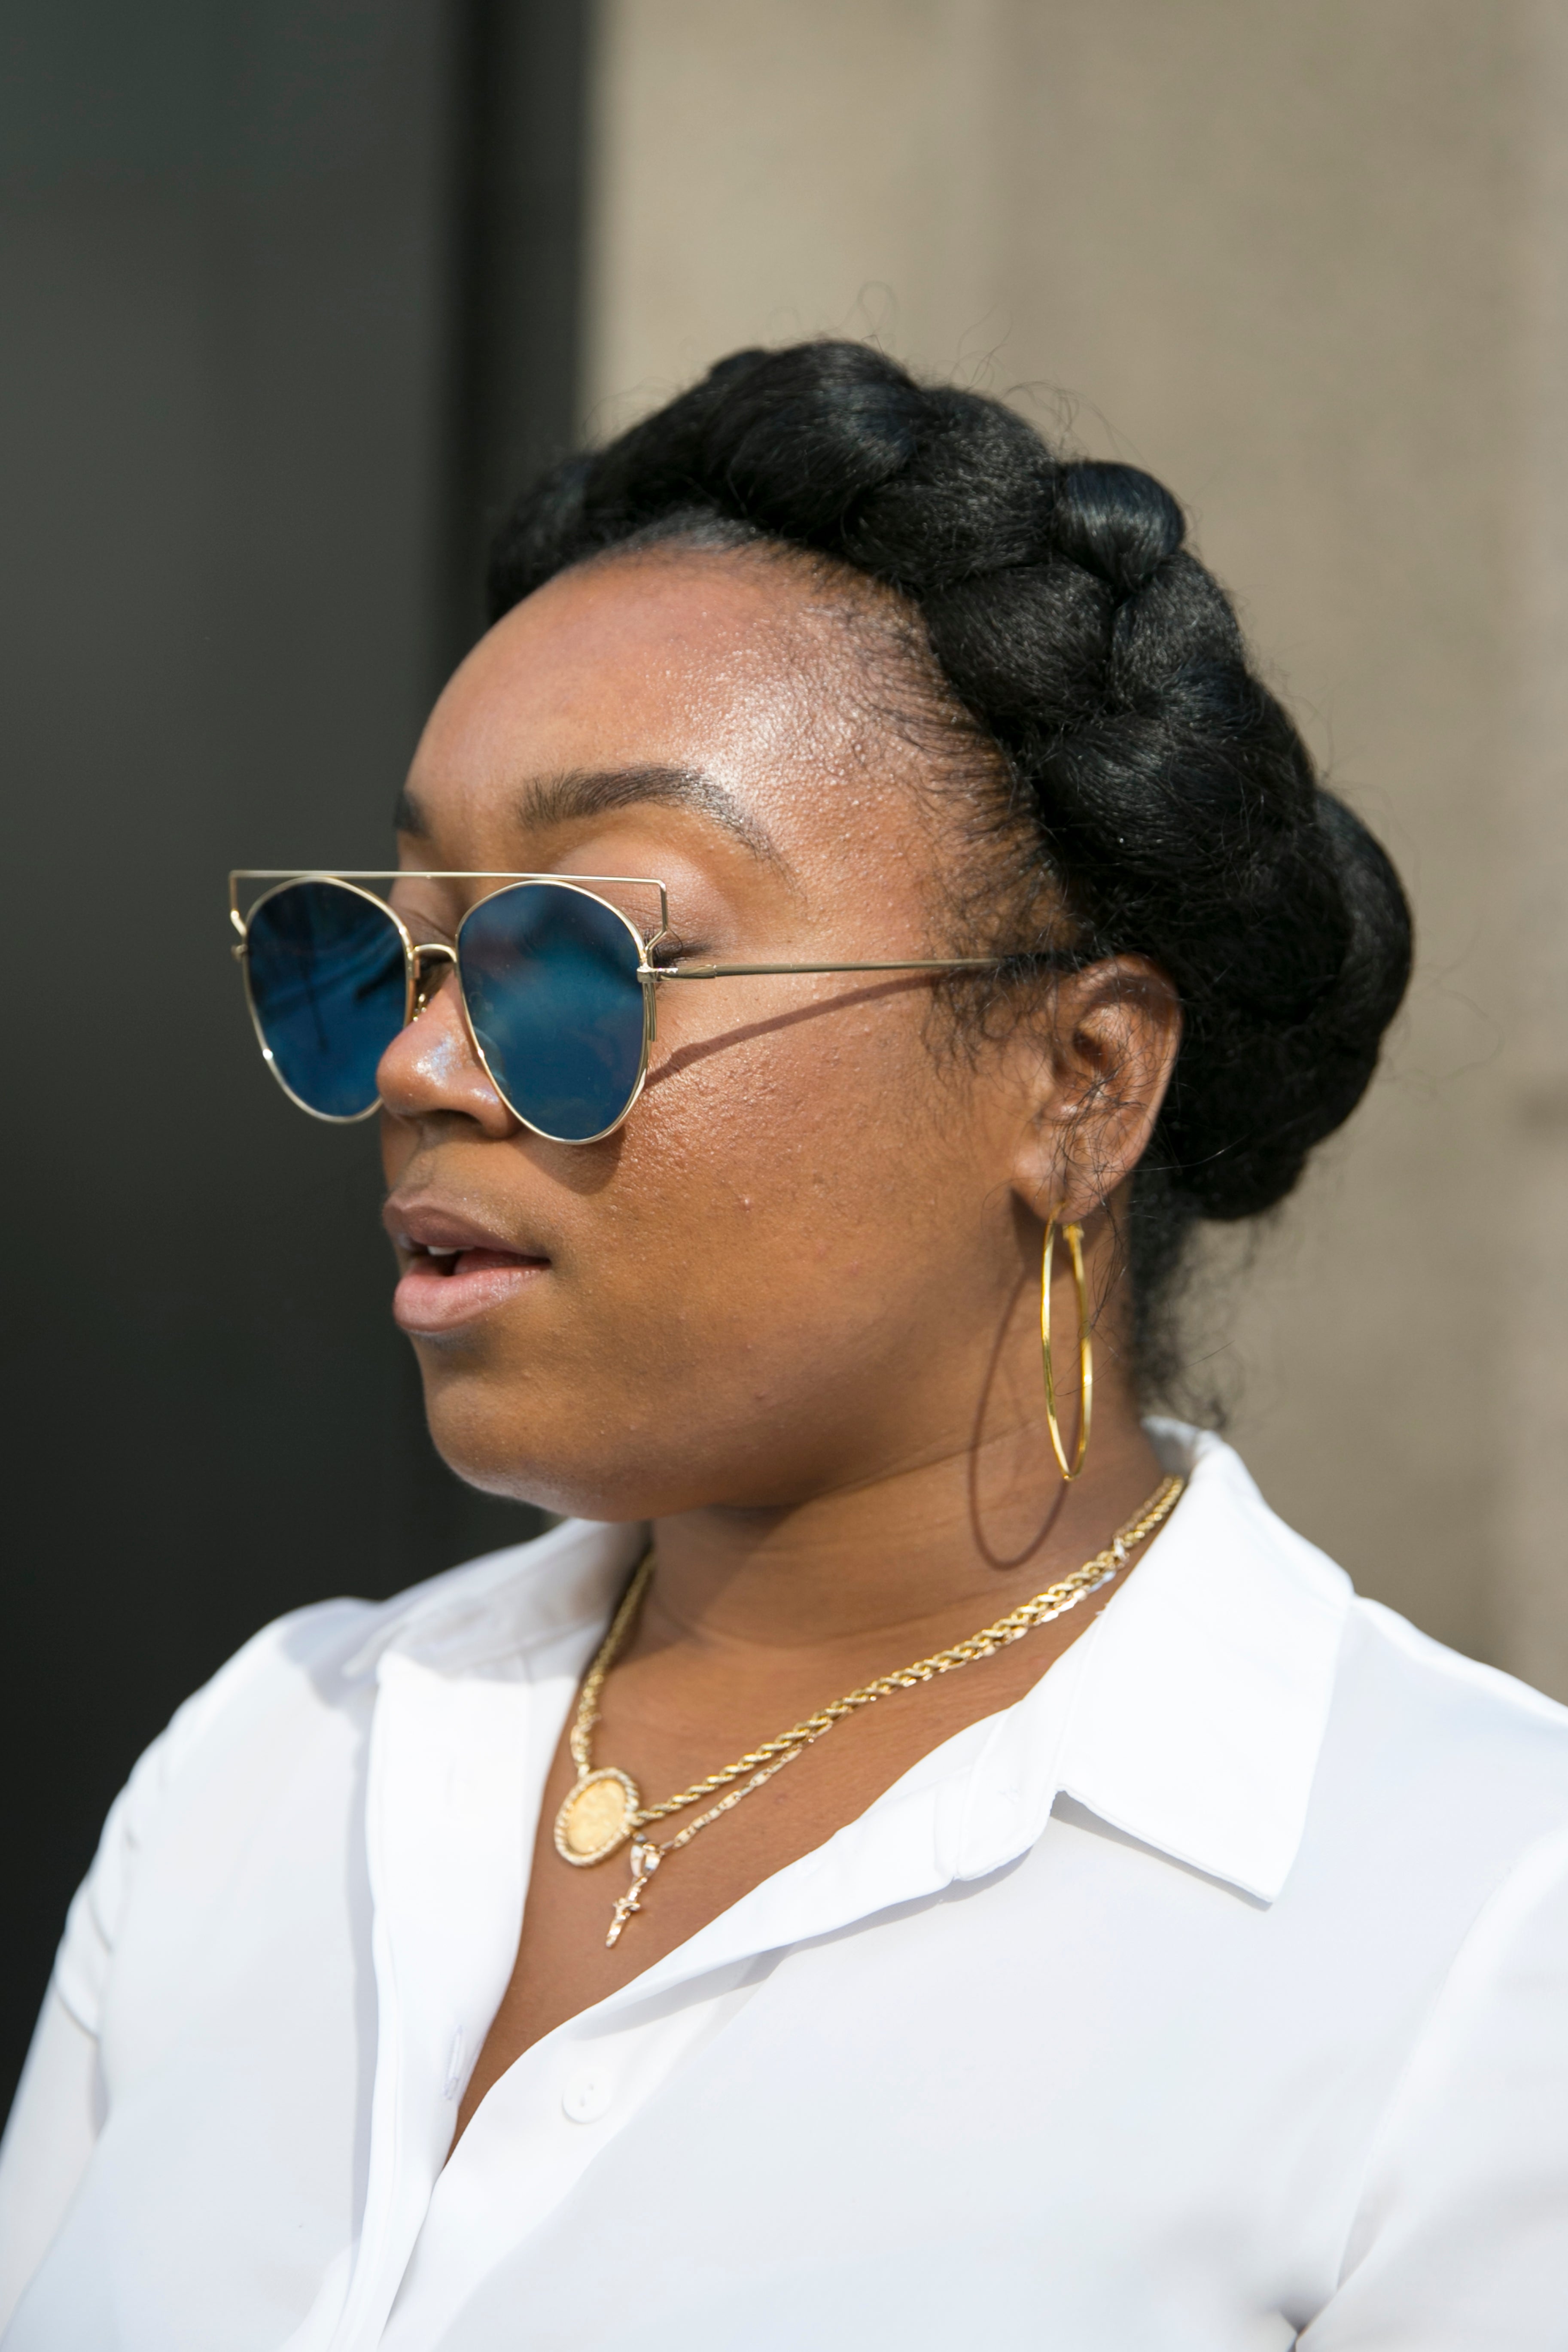 NYFW Hair and Beauty Looks From Street Style Queens
